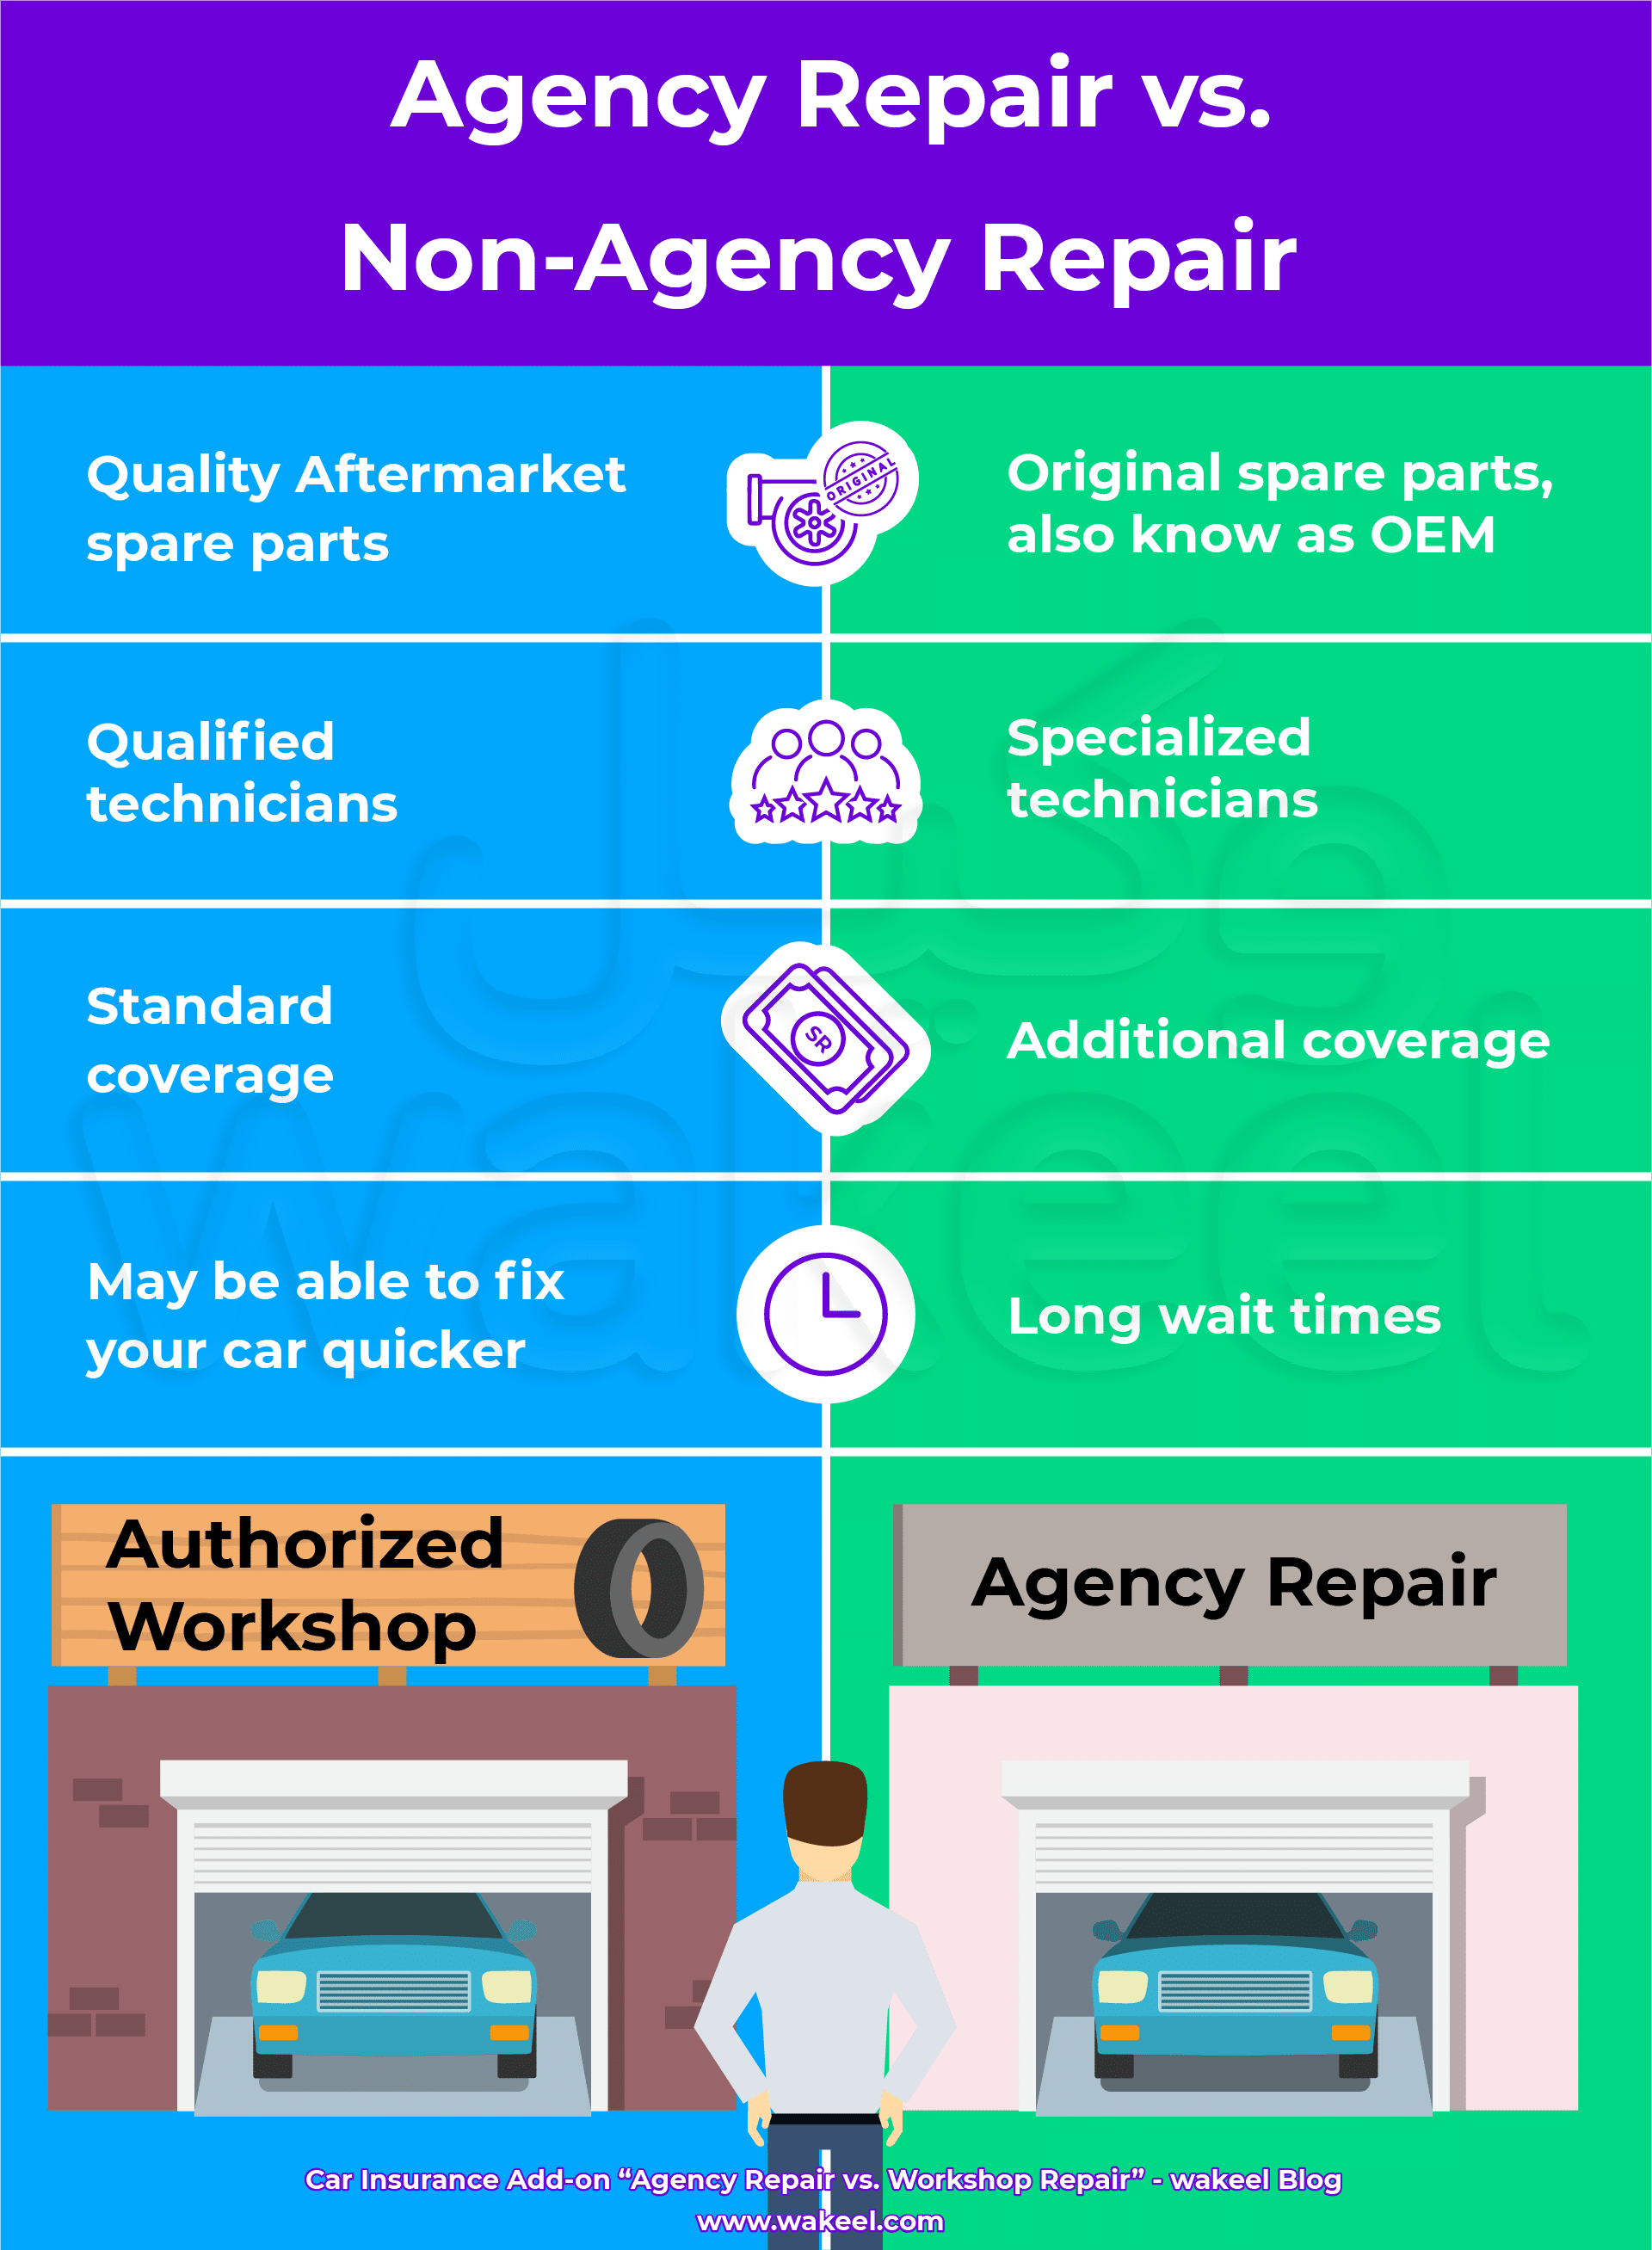 A quick comparison between a dealership repair and an authorized repair shop